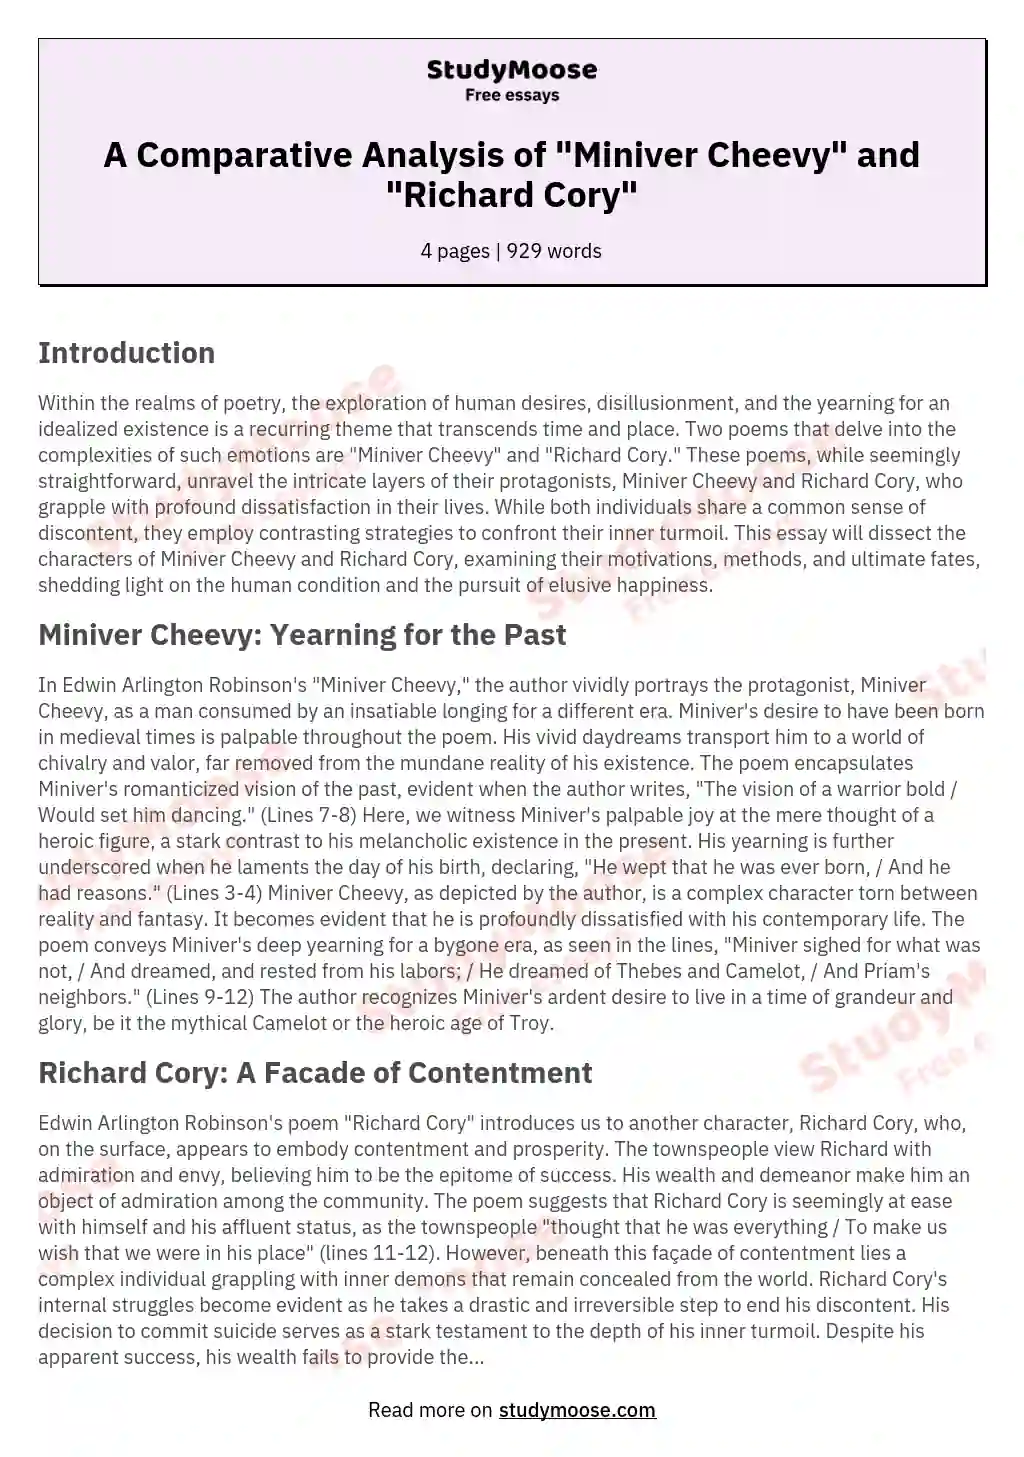 A Comparative Analysis of "Miniver Cheevy" and "Richard Cory" essay